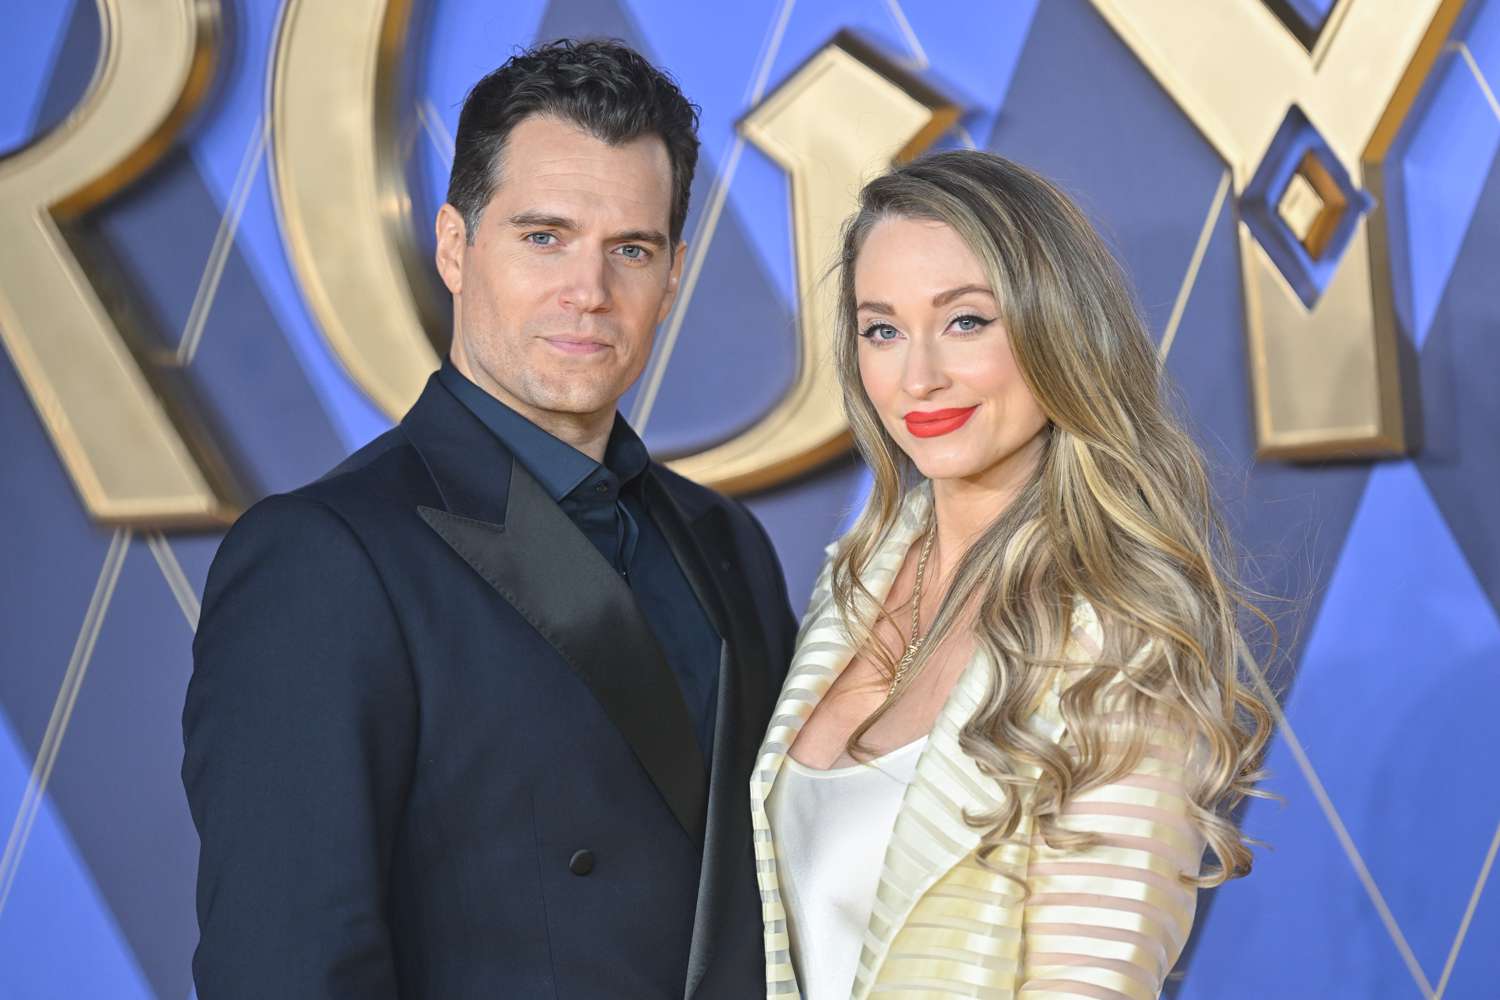 Henry Cavill and Girlfriend Natalie Viscuso Are Expecting Their First Baby